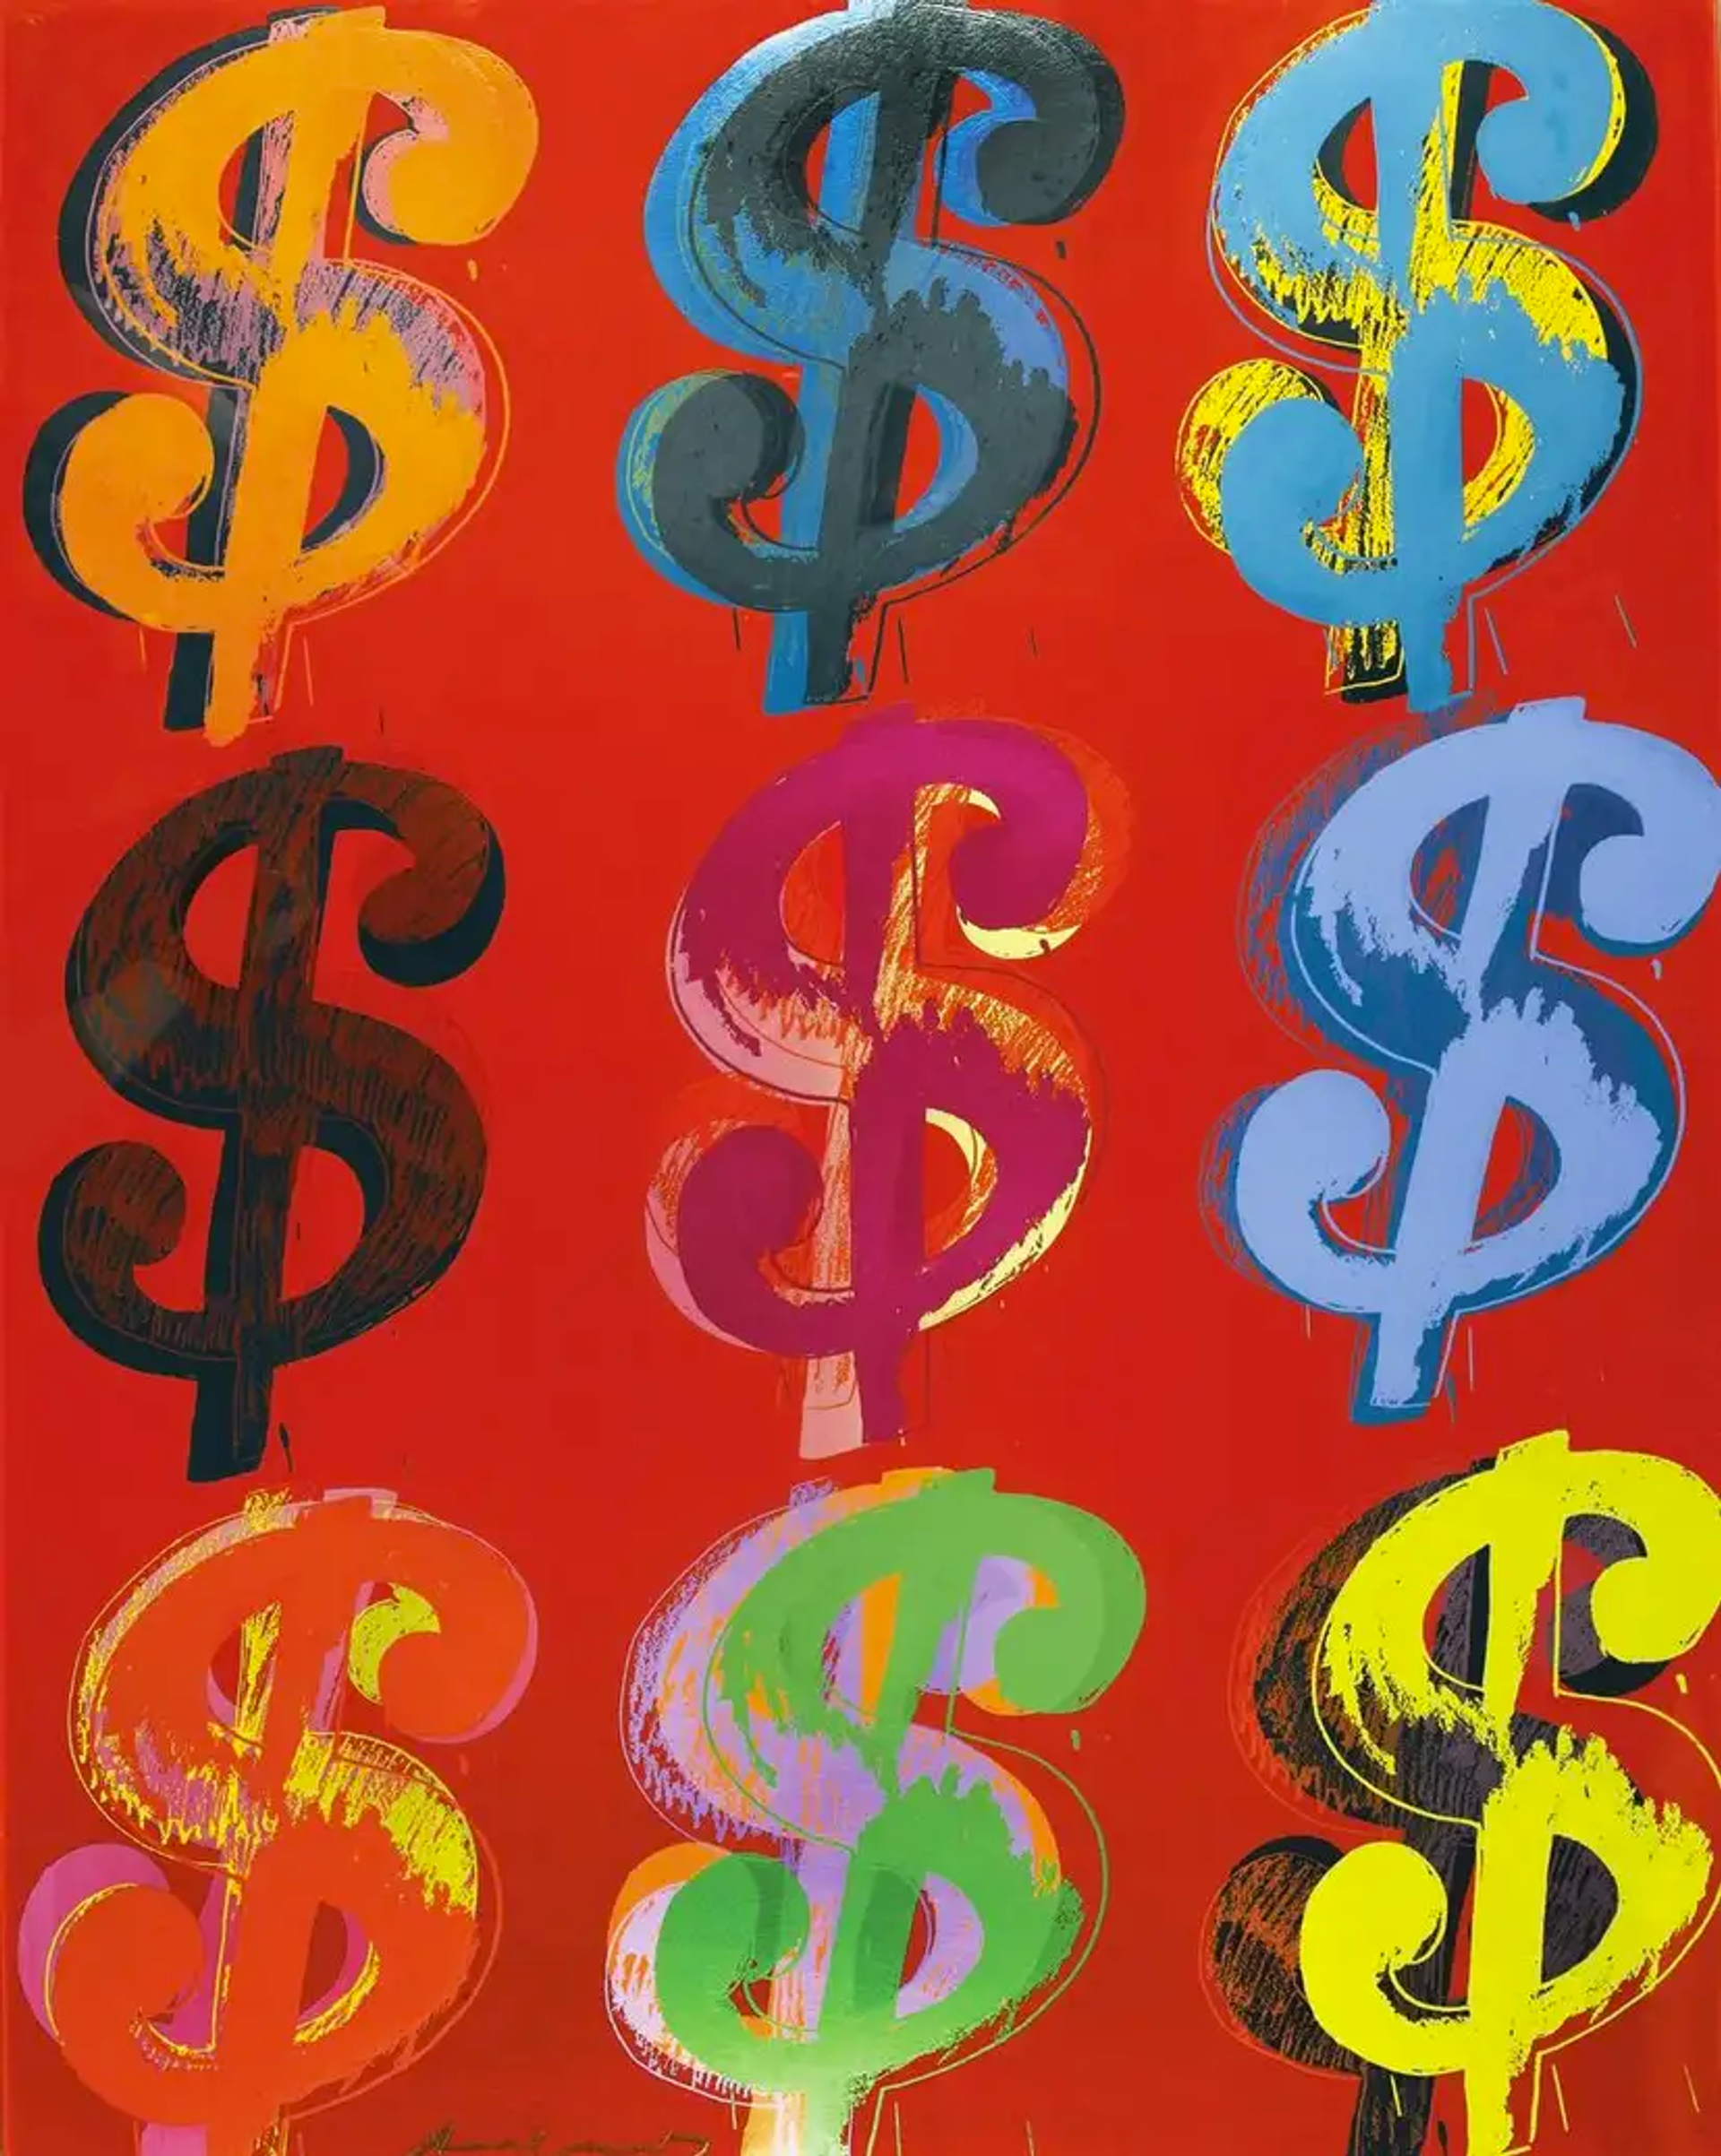 This print by Andy Warhol shows a series of dollar signs in various colours against a red background.